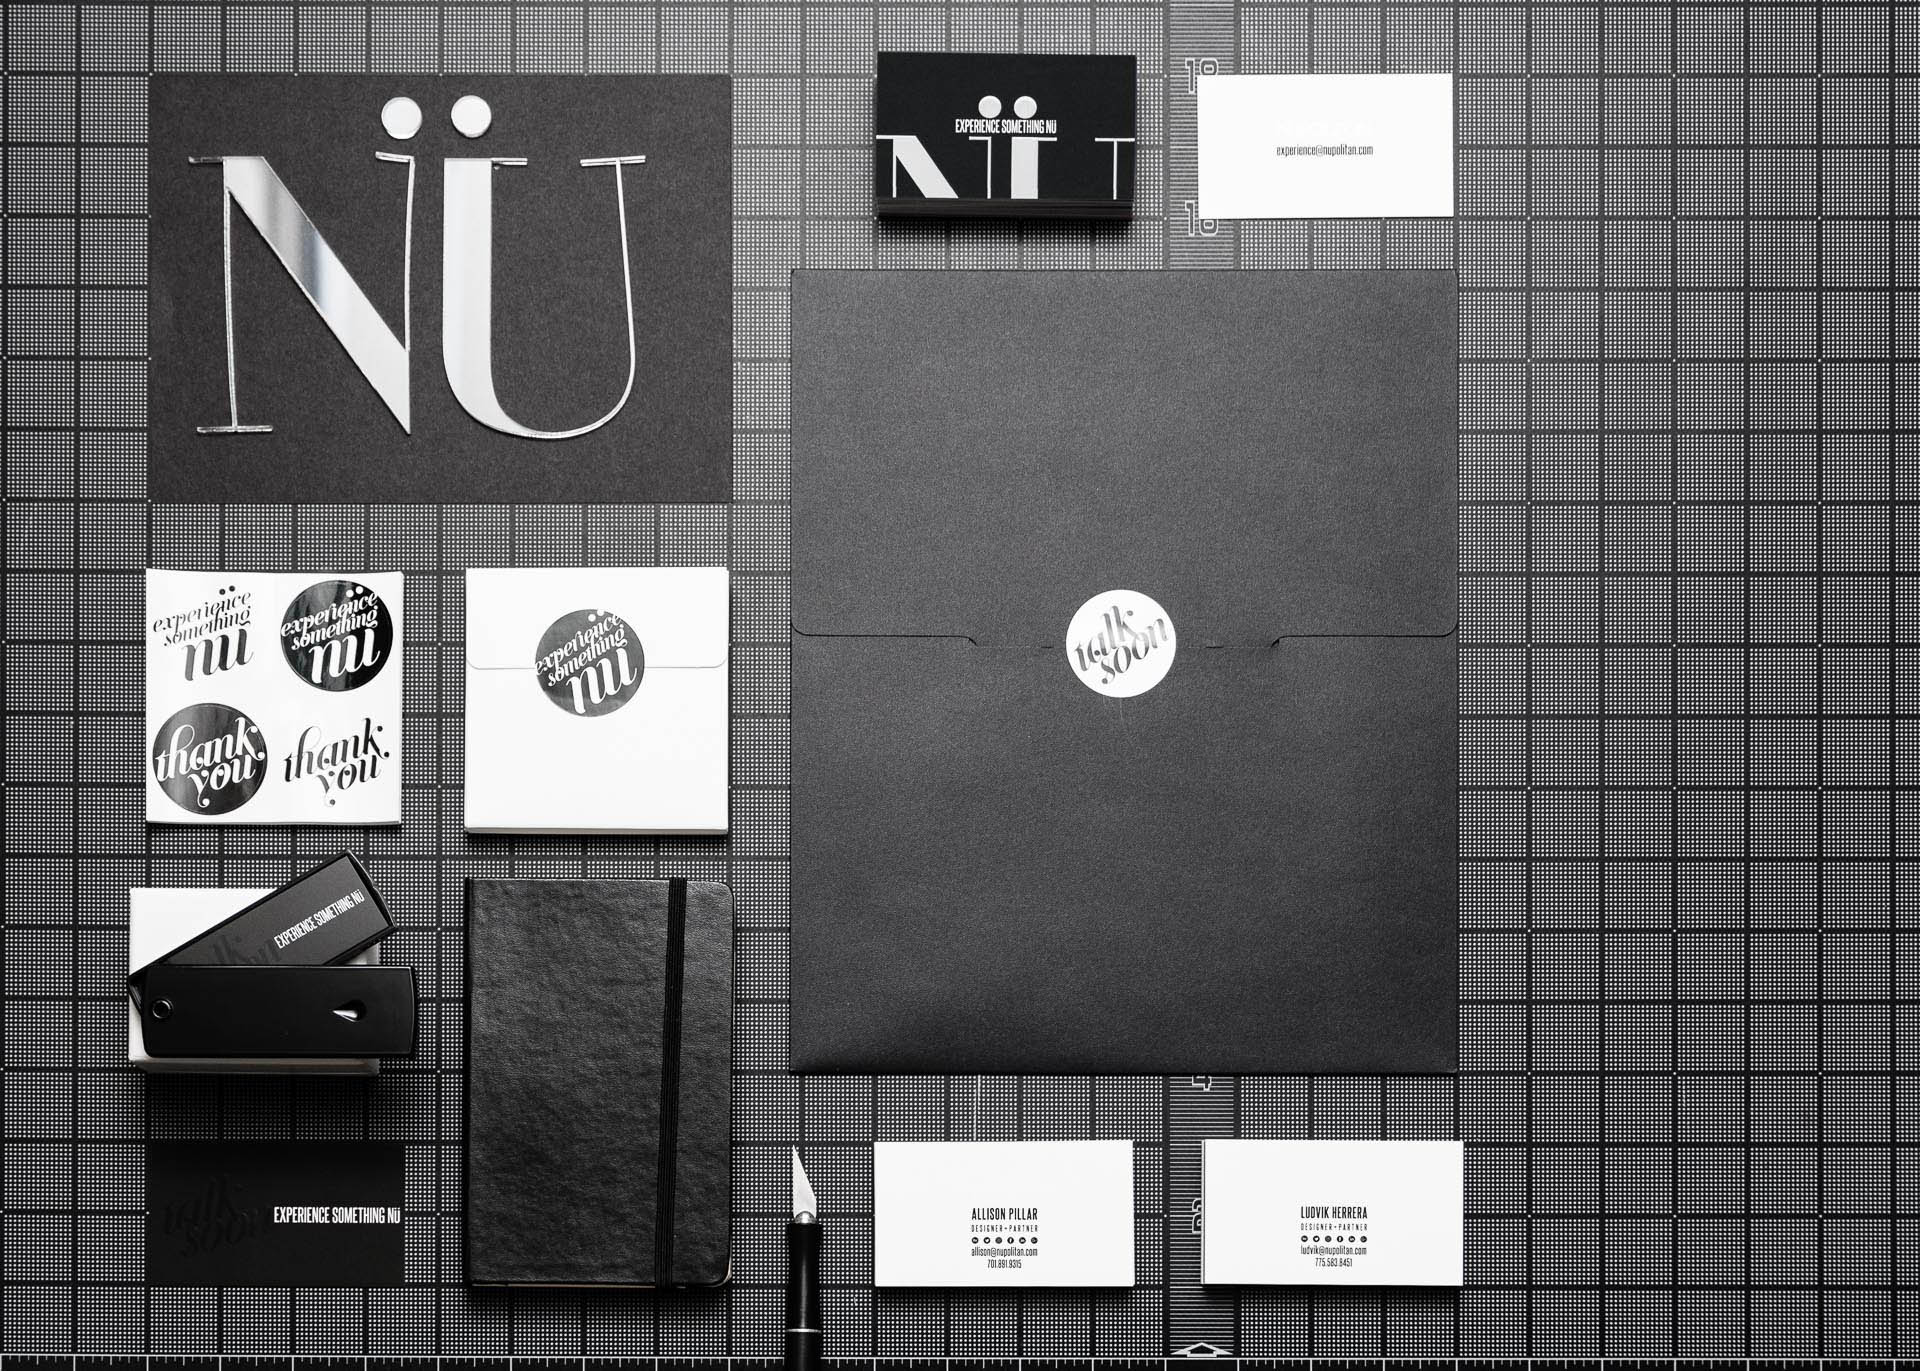 NÜ in acrylic letters, black and white round stickers, business cards, and a large black envelope on a black gridded surface